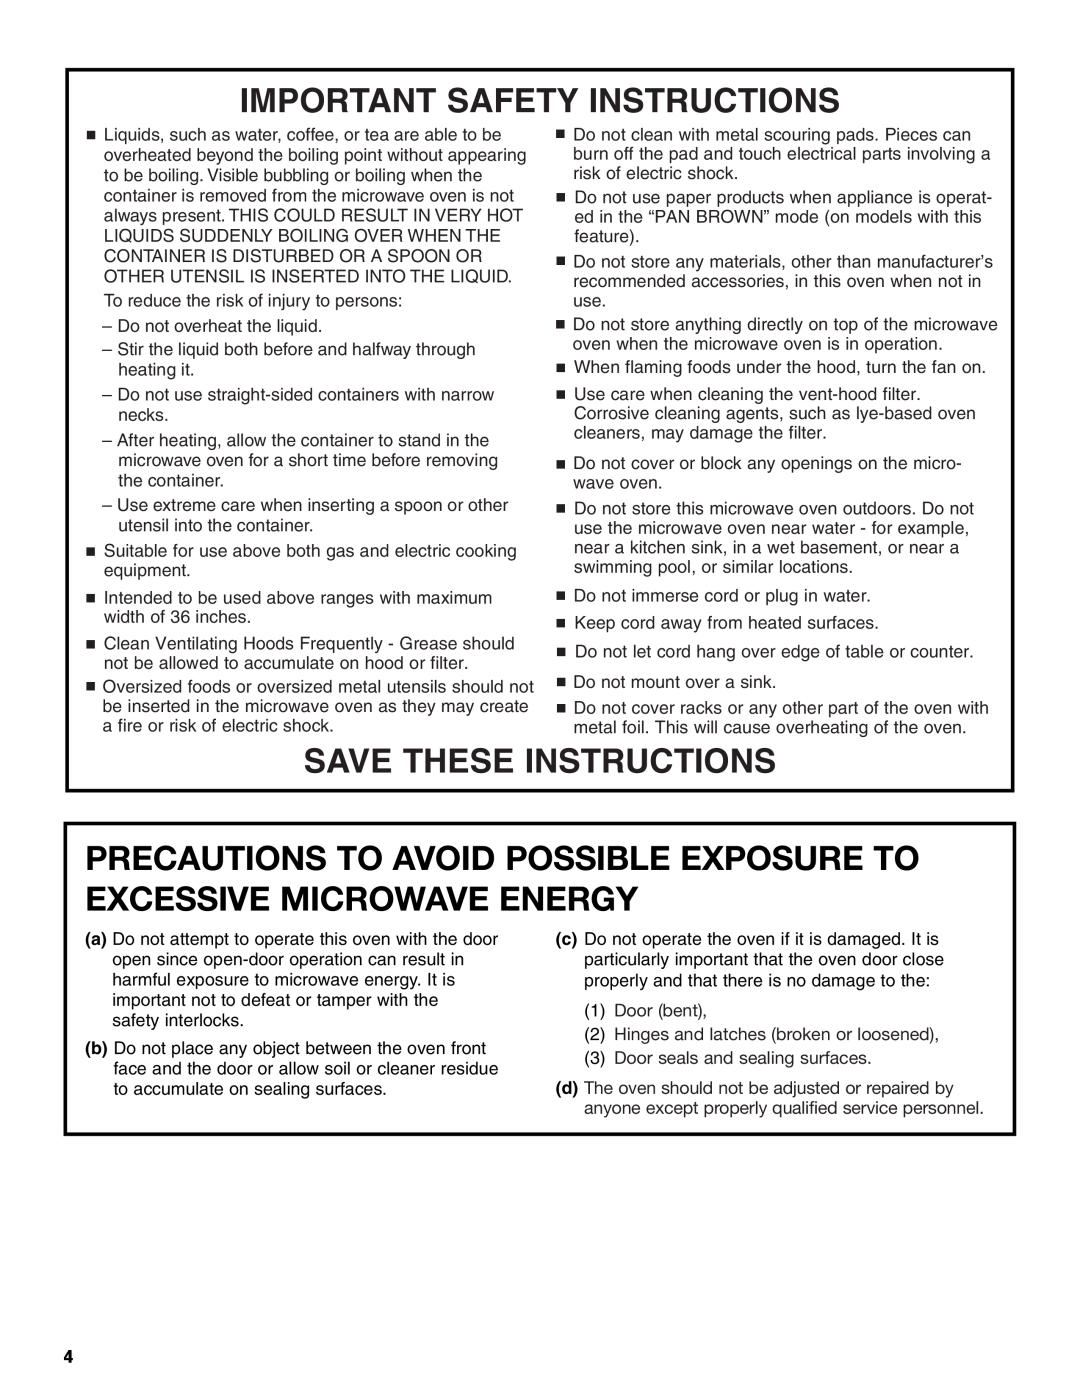 United Appliances YMH1150XM Precautions To Avoid Possible Exposure To Excessive Microwave Energy, Save These Instructions 